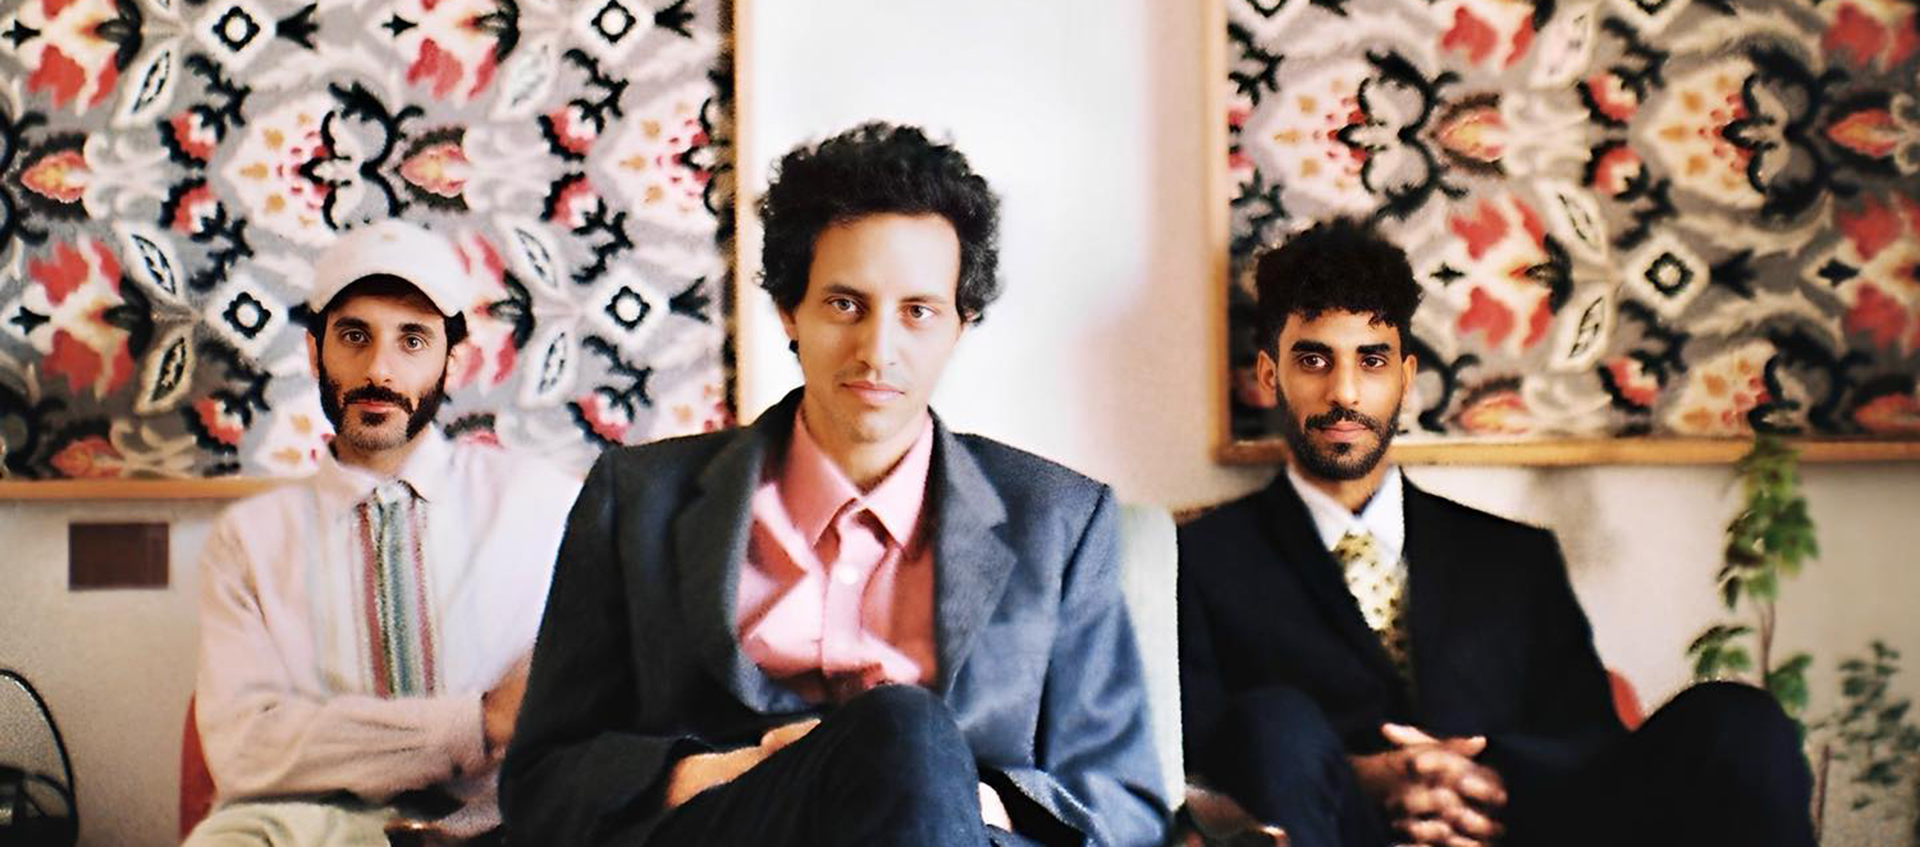 Three members sit in chairs in front of two large frames featuring red, black, and white patterns. Band leader Eyal El Wahab sits in the forefront.